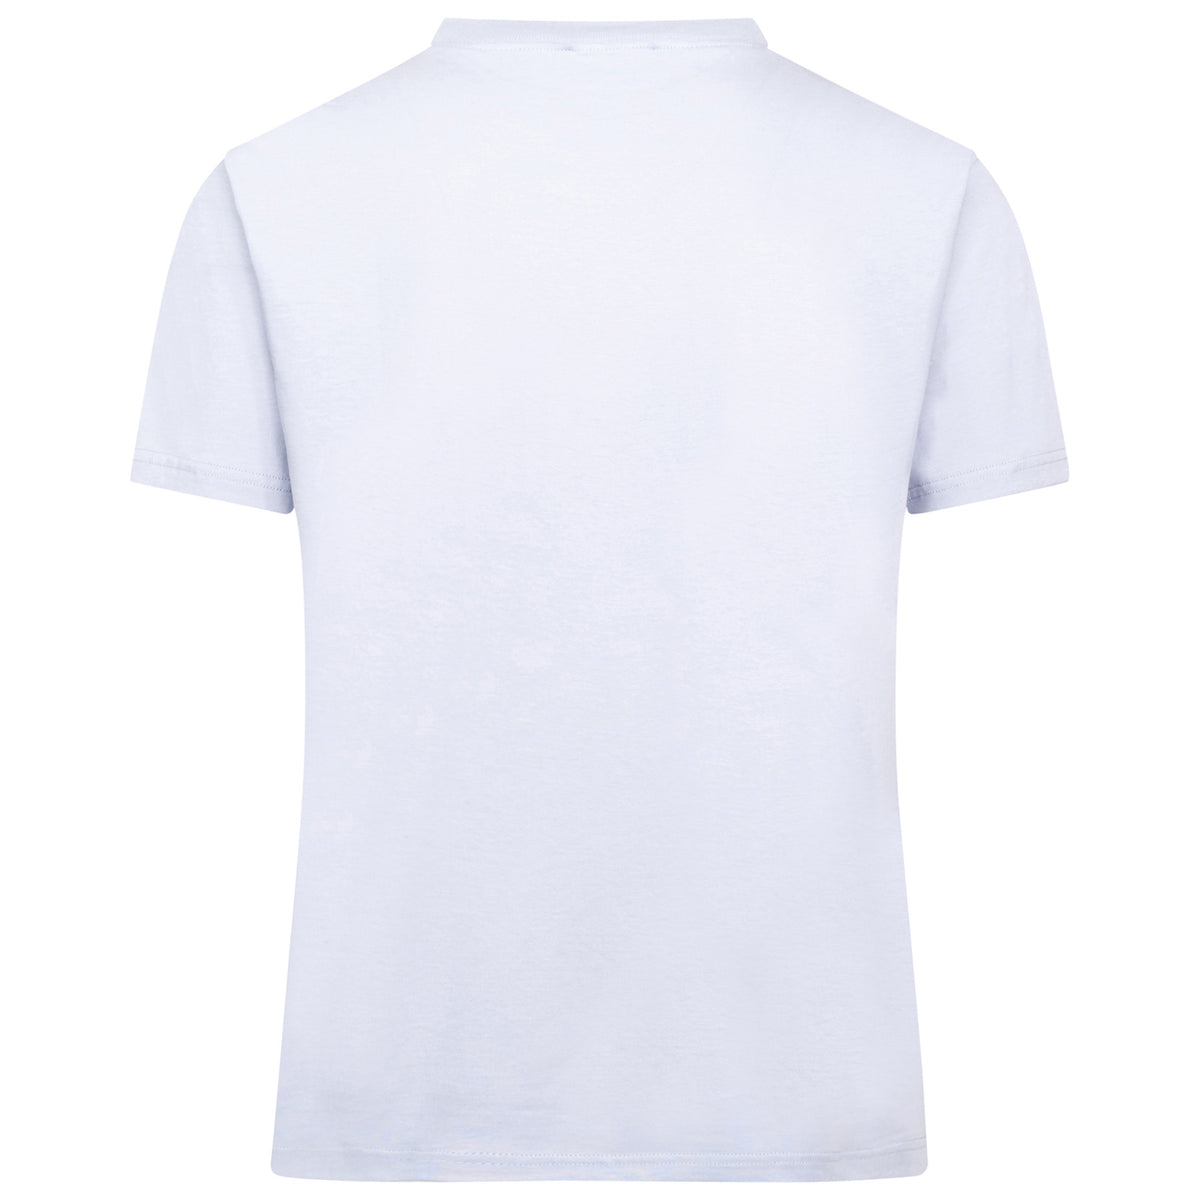 Load image into Gallery viewer, A.P.C. Lilac Kyle Logo Tee
